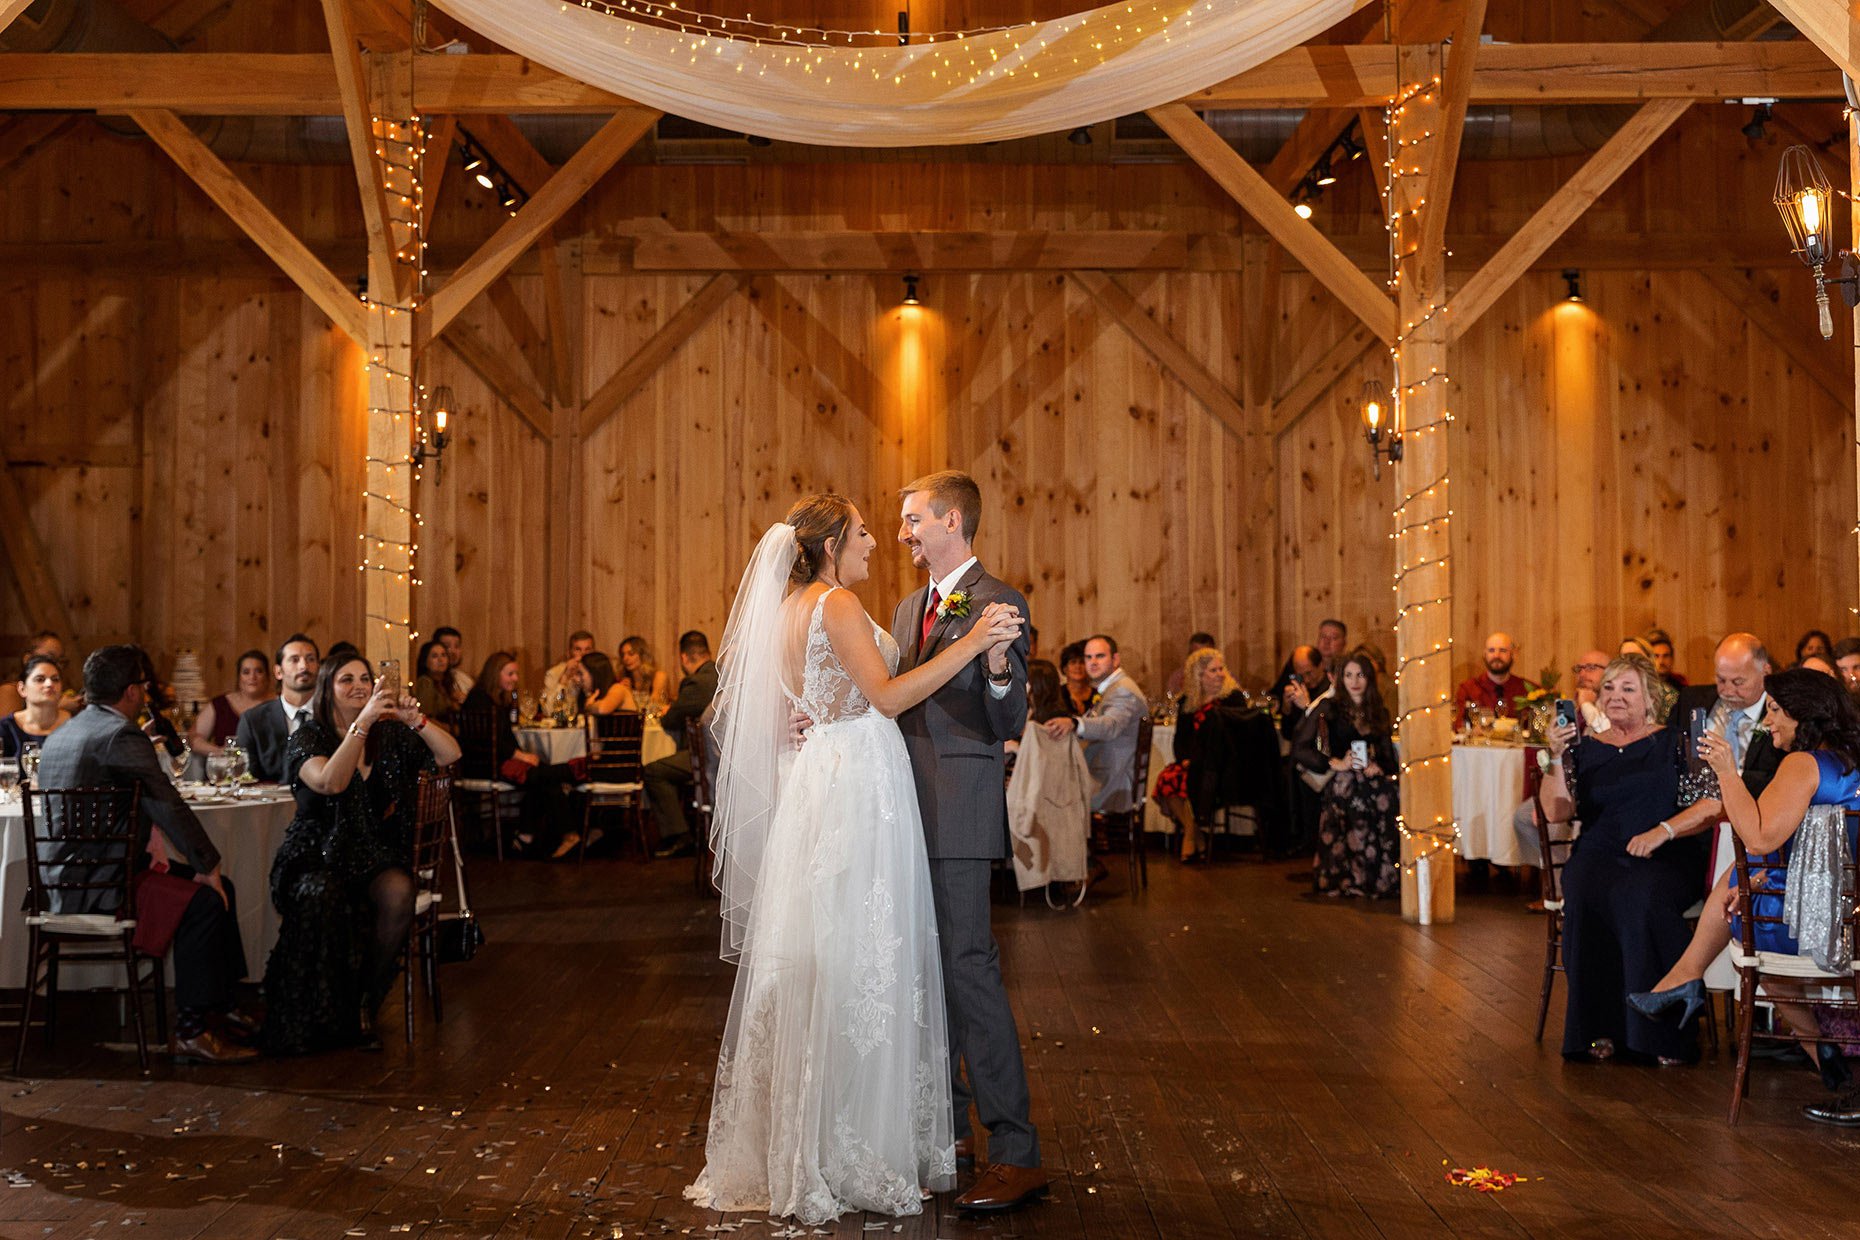 First Dance as husband and wife